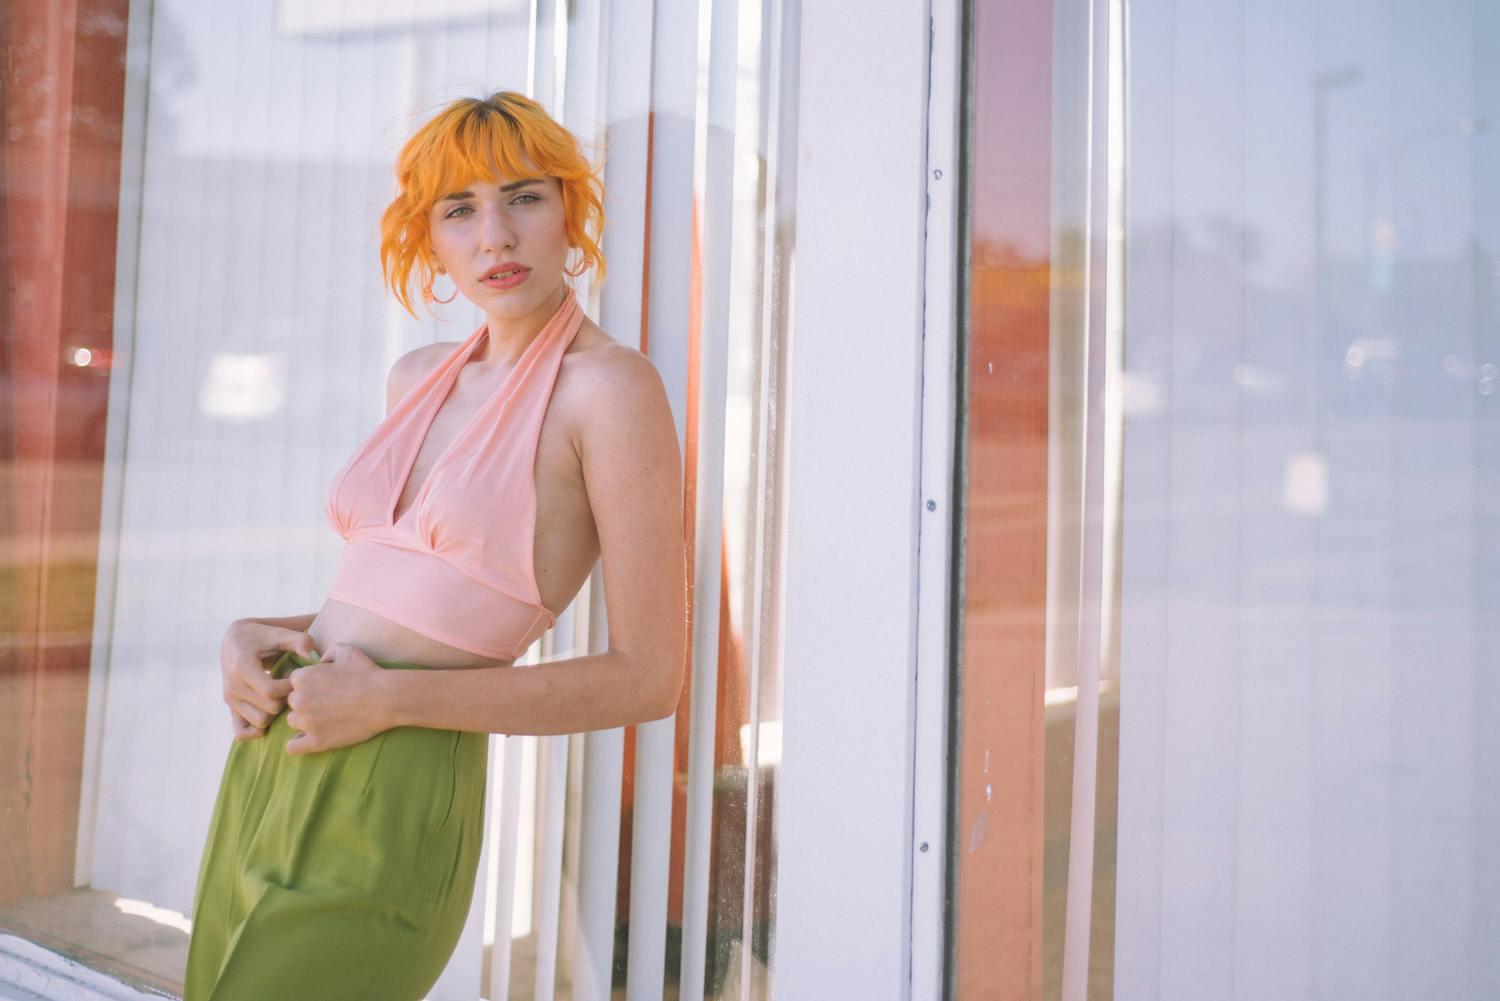 a portrait of Libby against a diner window holding her hands on the waistband of her pants, she is wearing a pink vintage top and green trousers and her hair is an orange color.